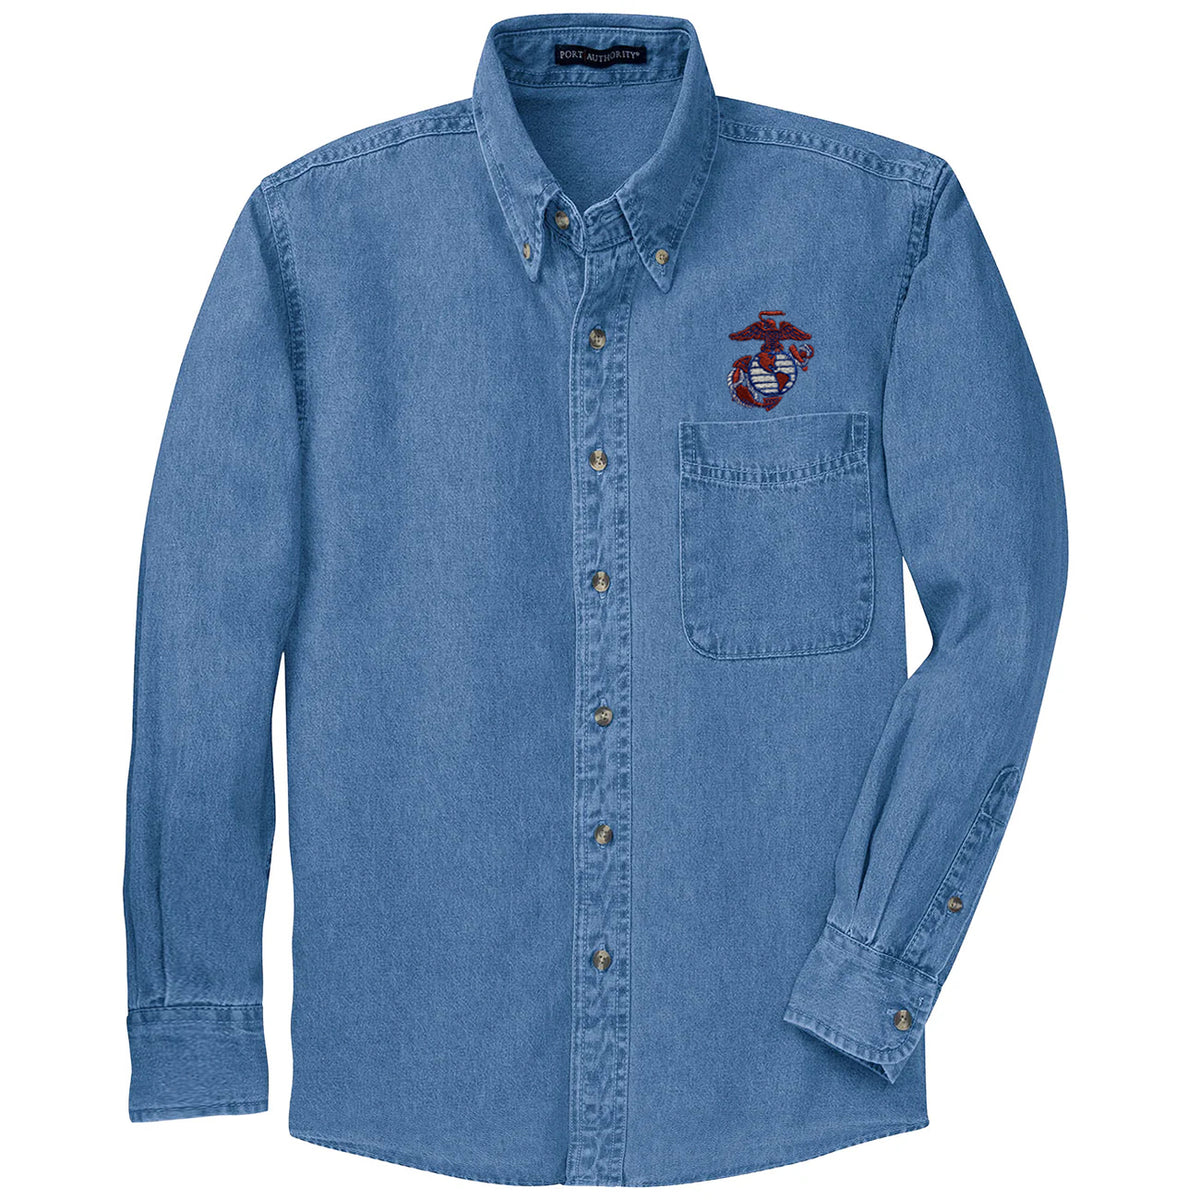 Marines USA Embroidered Faded Denim Button Up